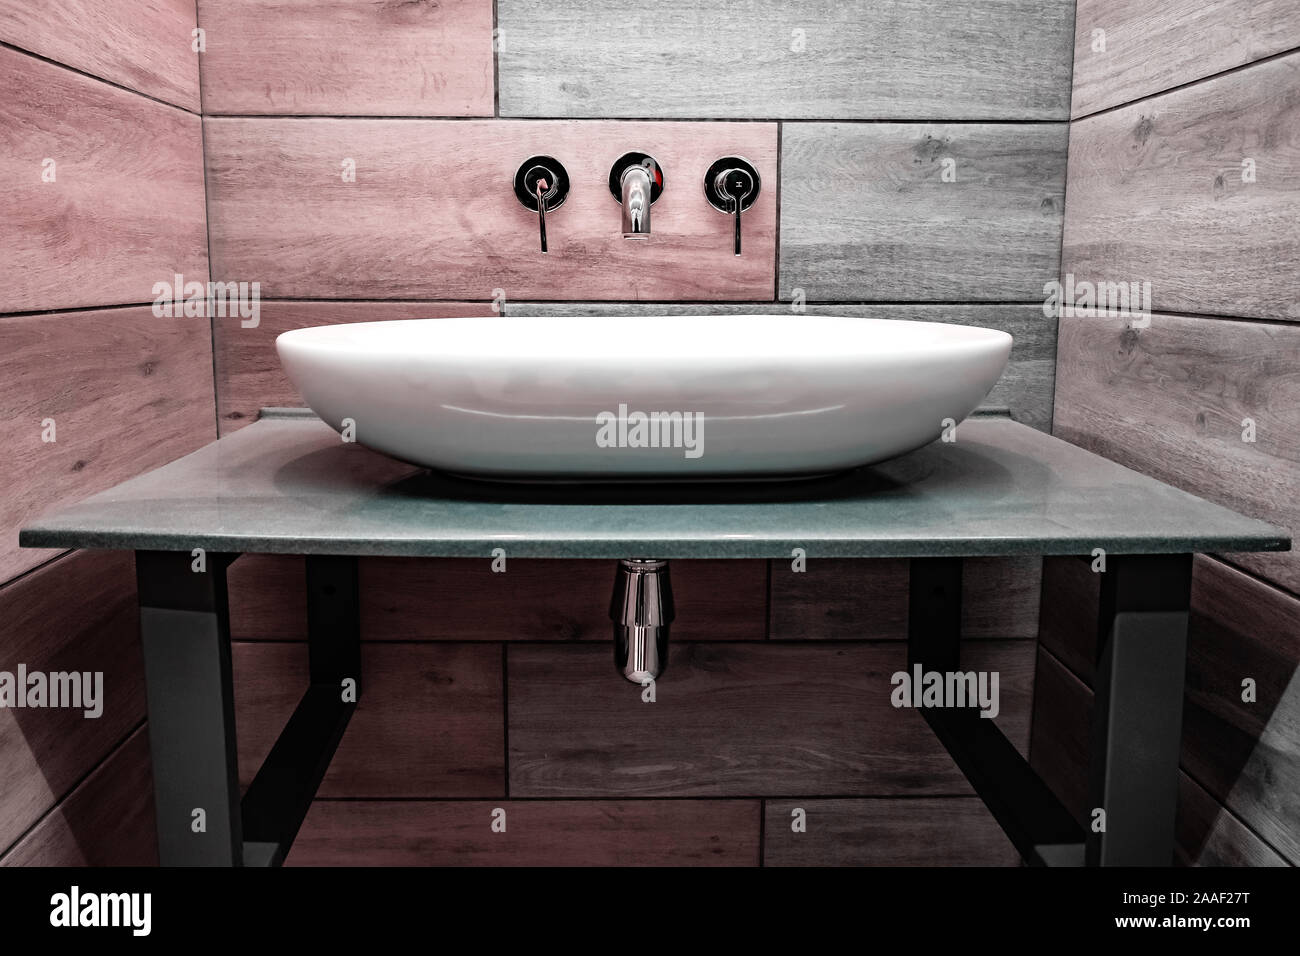 Classic modern white washbasins with chrome water tap and soap dish Stock Photo